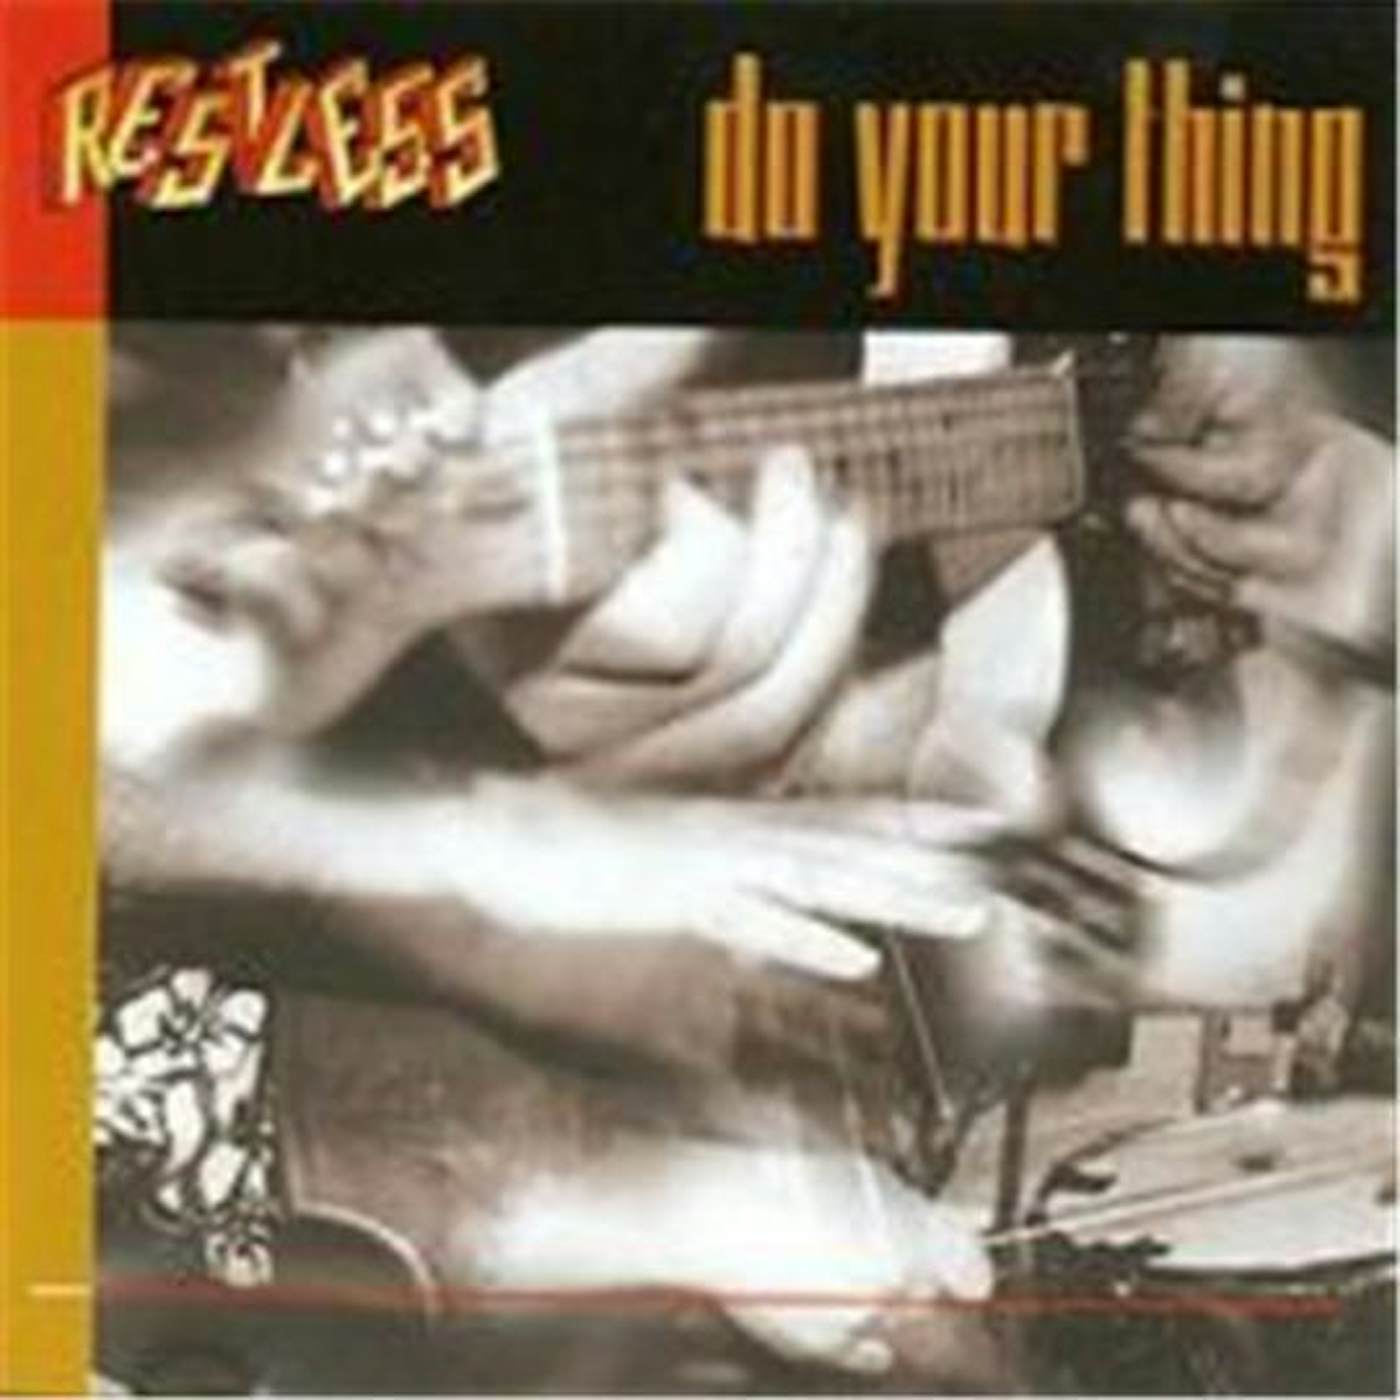 Restless DO YOUR THING CD